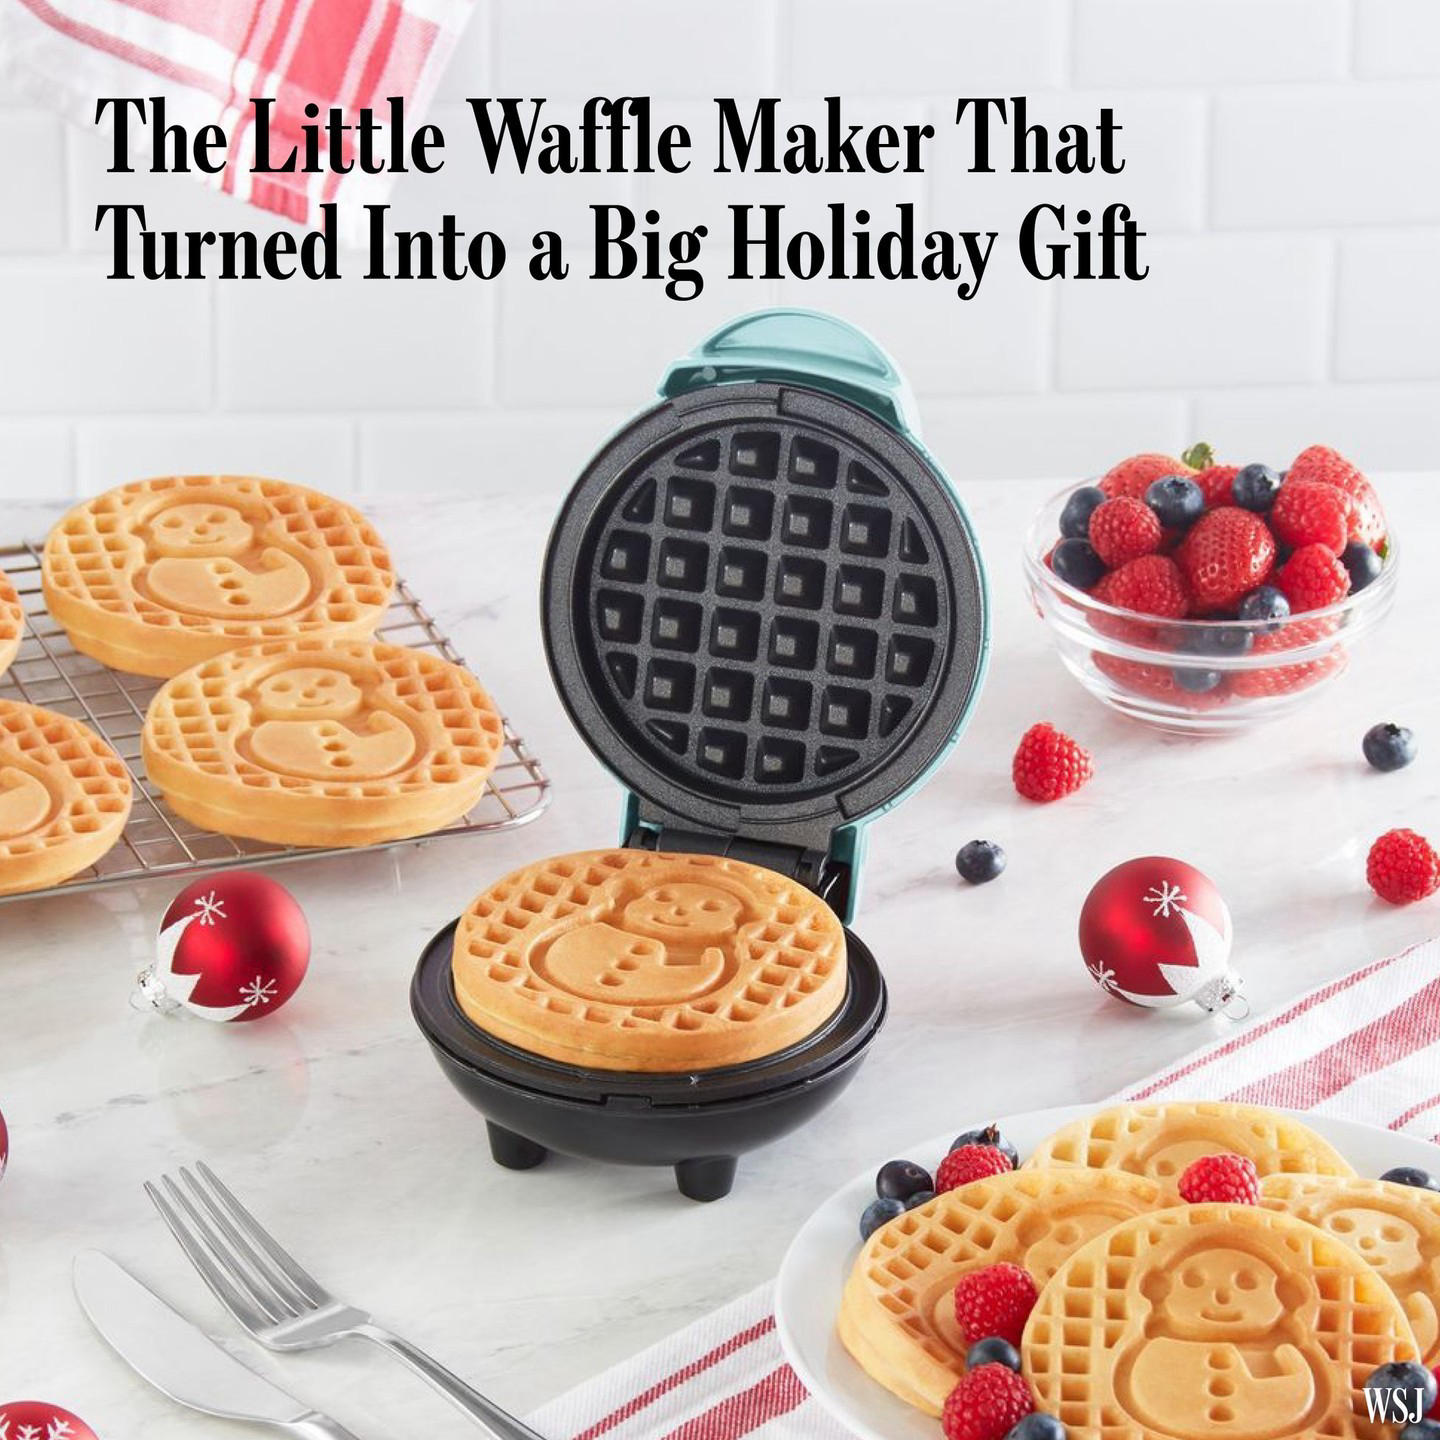 The Wall Street Journal - If you’re thinking about giving a mini waffle maker as a gift for the holi